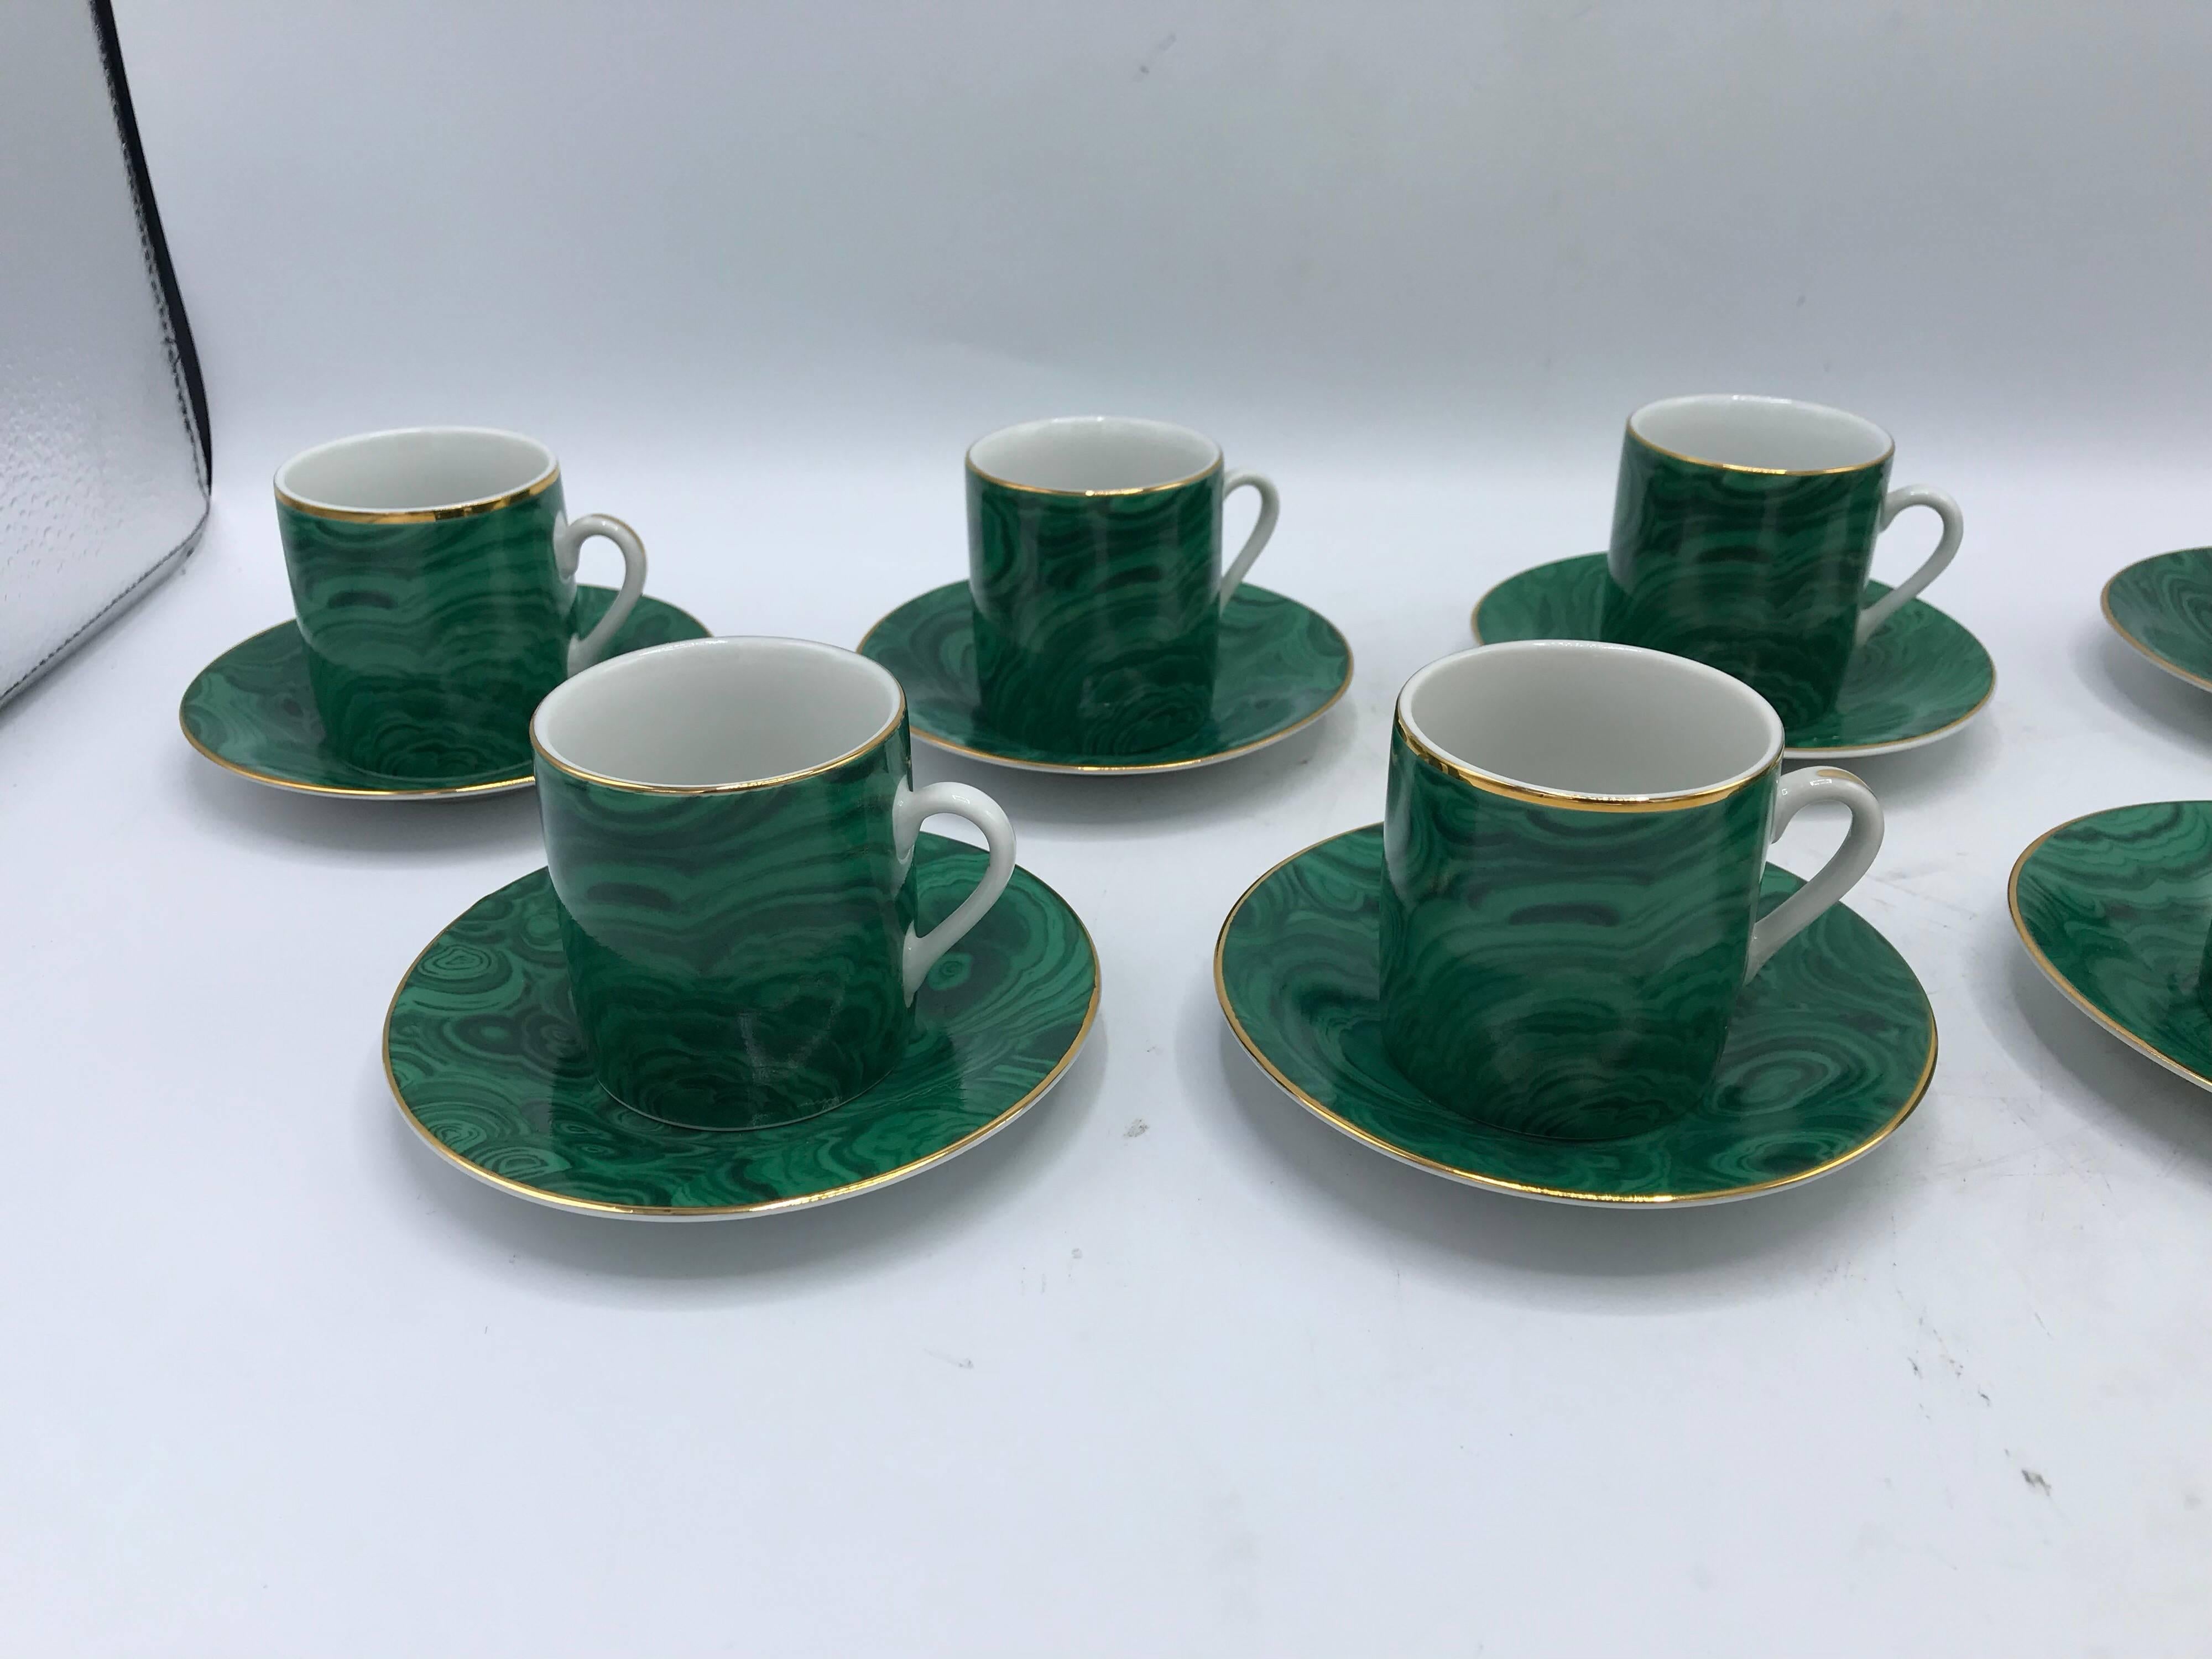 Offered is a stunning set of eight, 1980s Neiman Marcus malachite porcelain teacups and saucers with a gold 24-carat band around the perimeter. Marked ‘Neiman Marcus’ on underside. Made in Japan. Service for eight. Each saucer measures 4.5